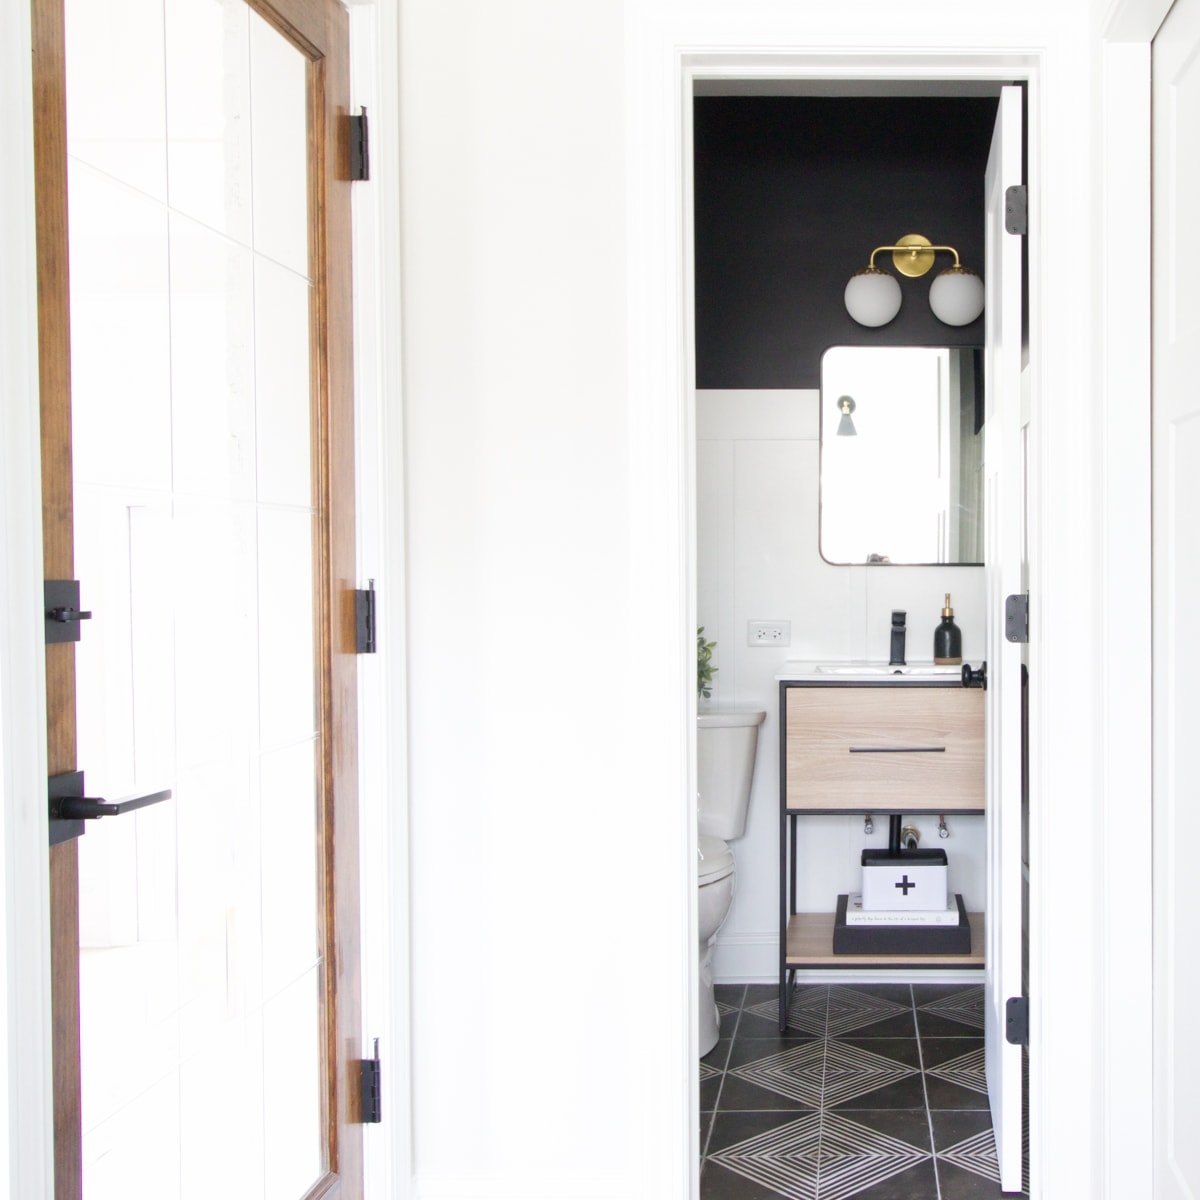 The reveal of a powder room makeover